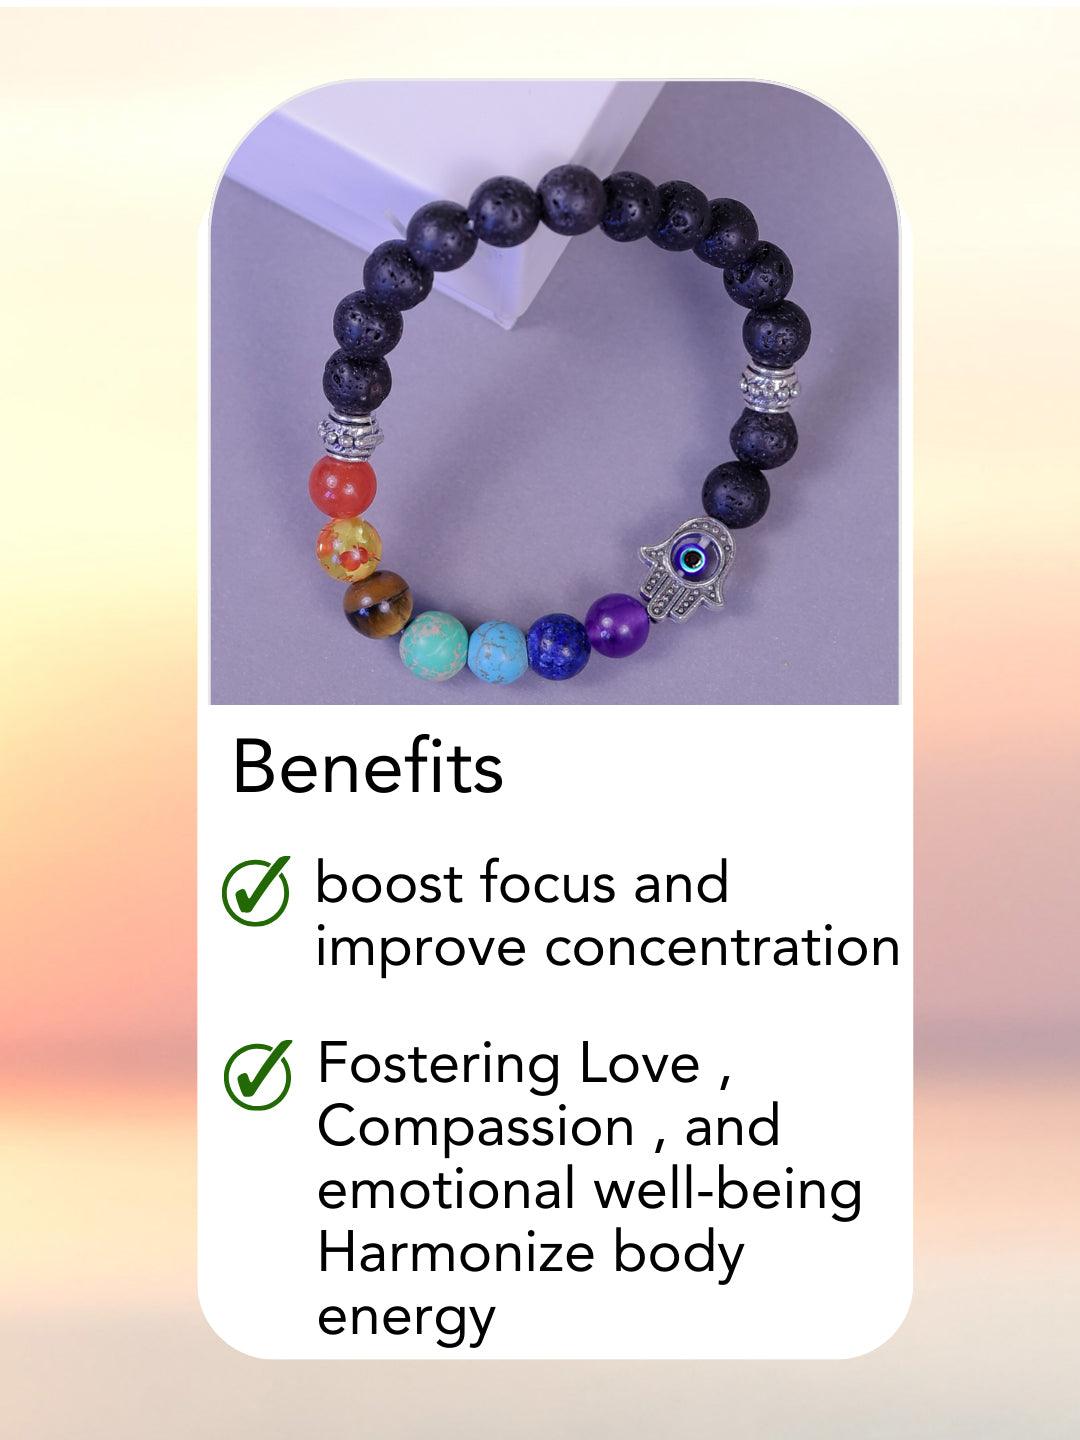 7 Chakra Bracelet Benefits: Unleashing the Meaning and Significance of  Seven Chakras — AtoAllinks | by Compassewelry | Medium